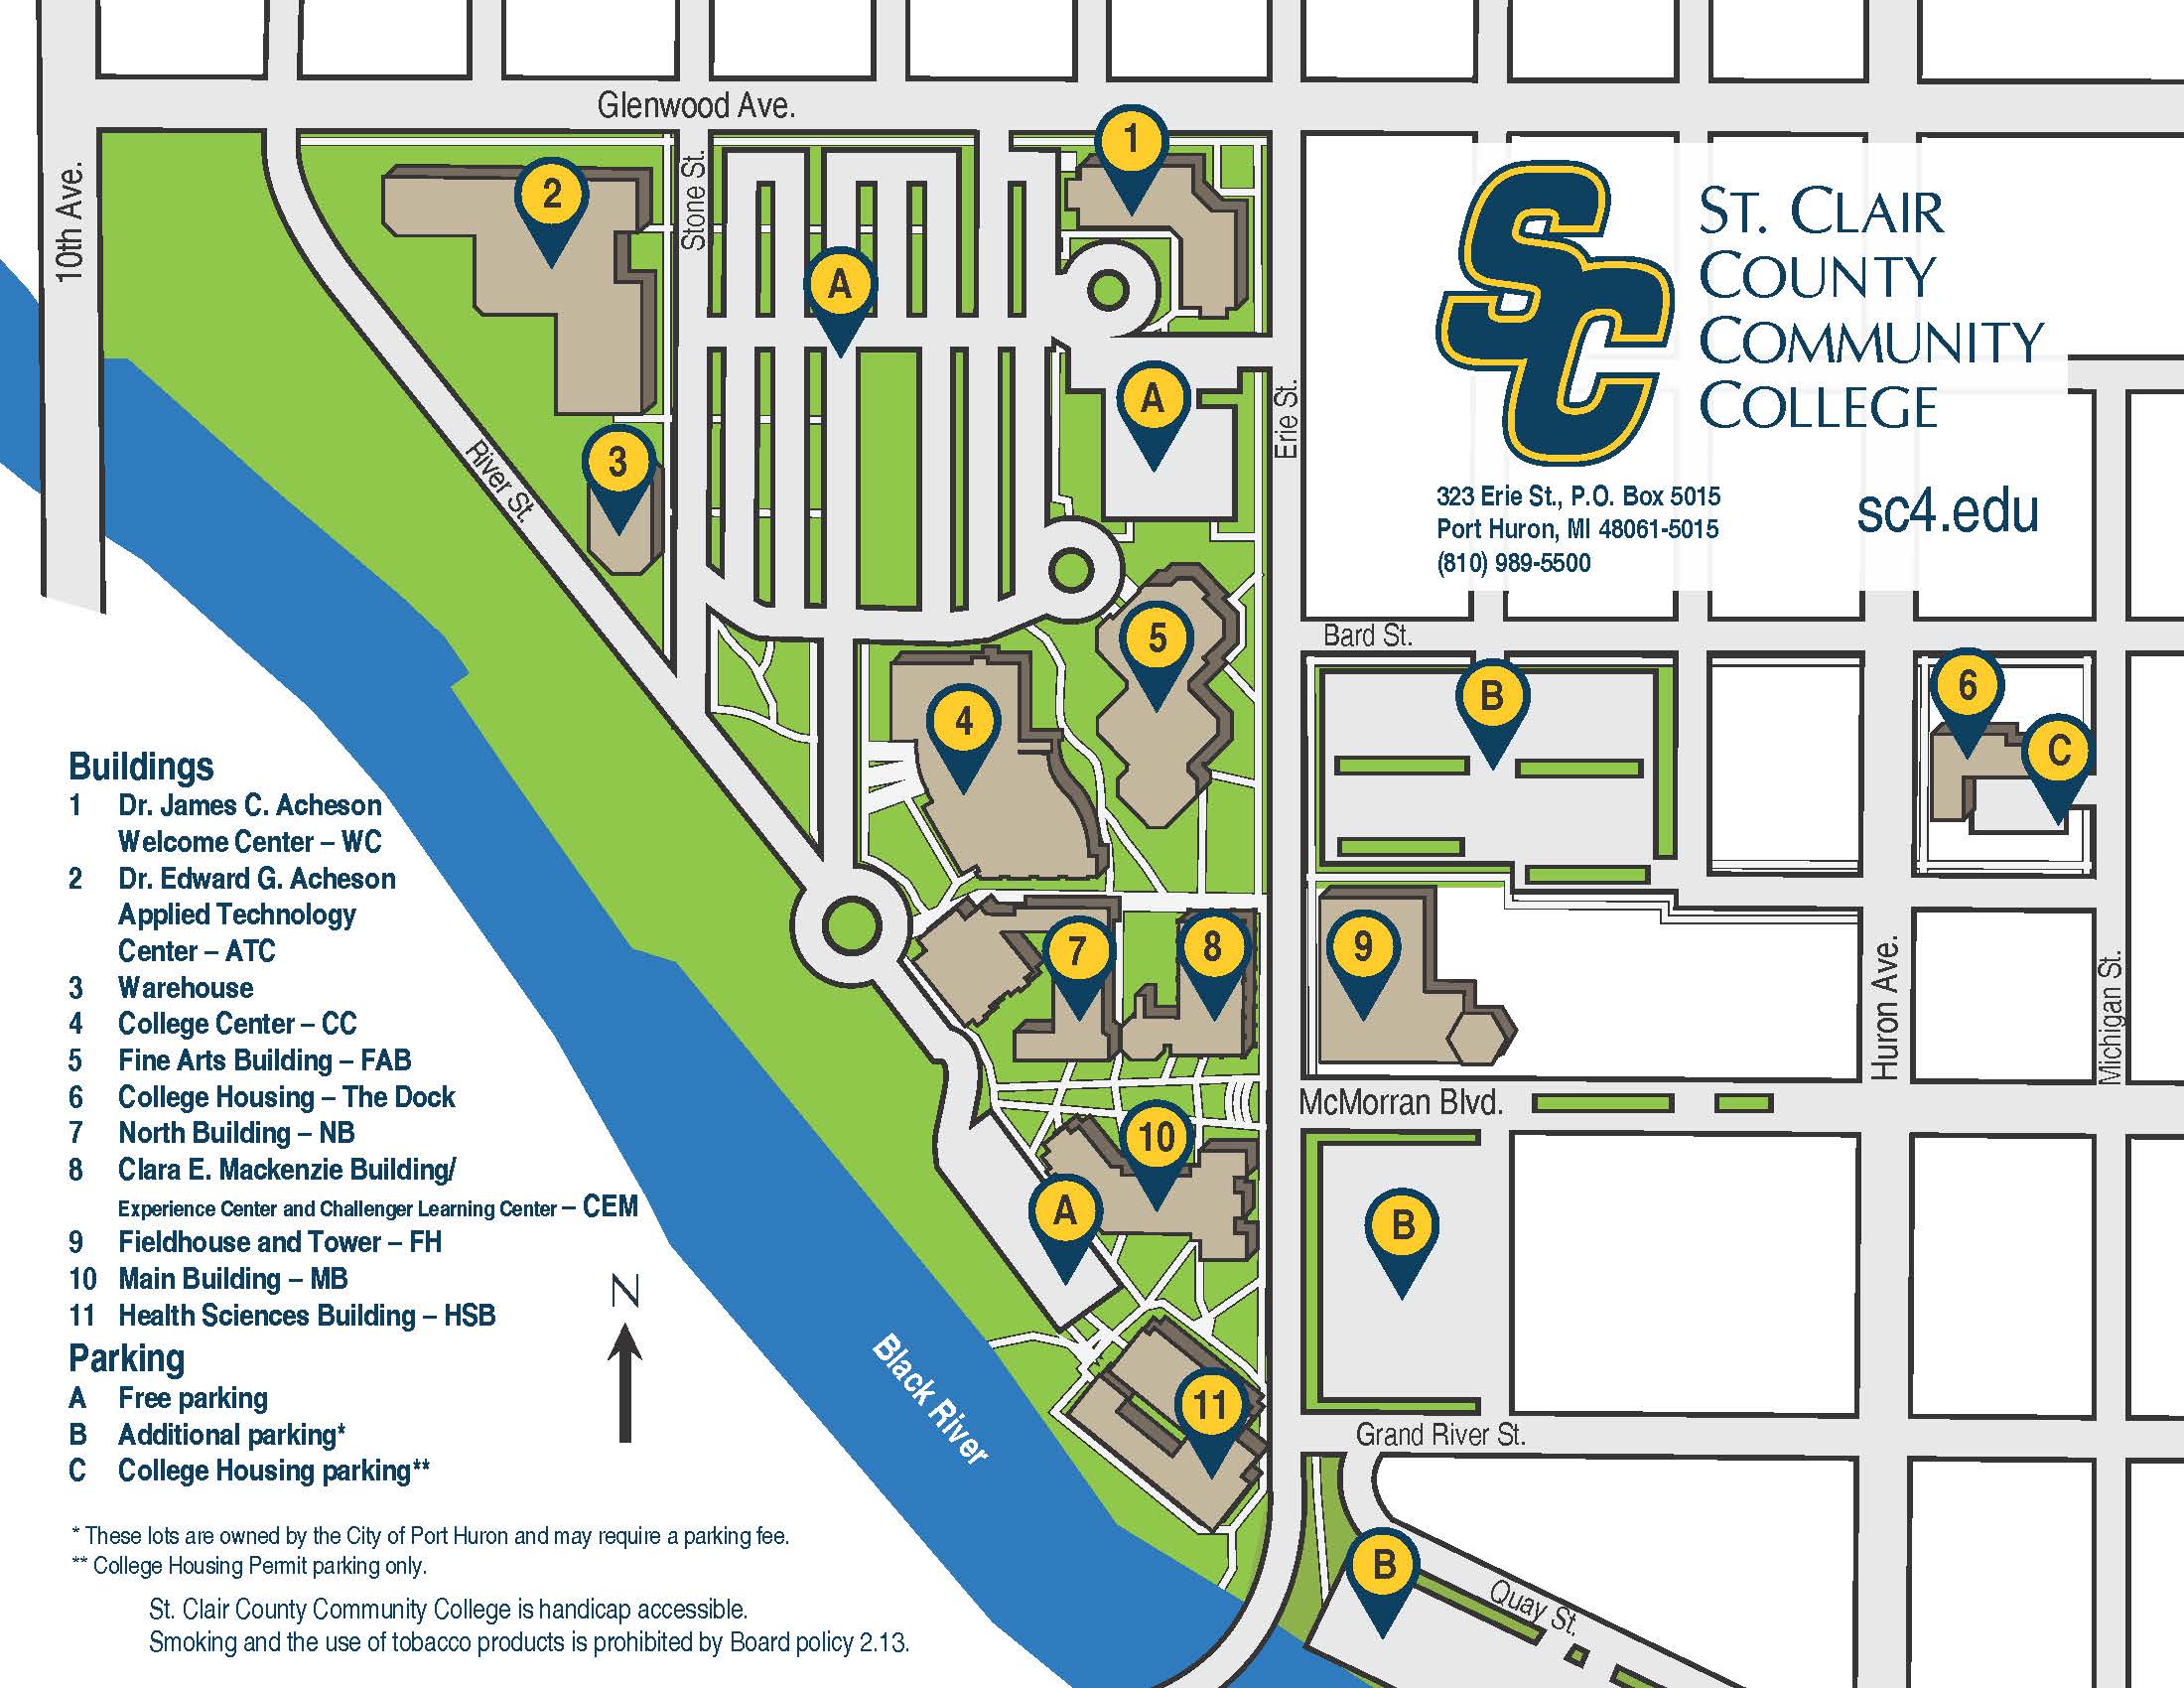 St. Clair County Community College campus map